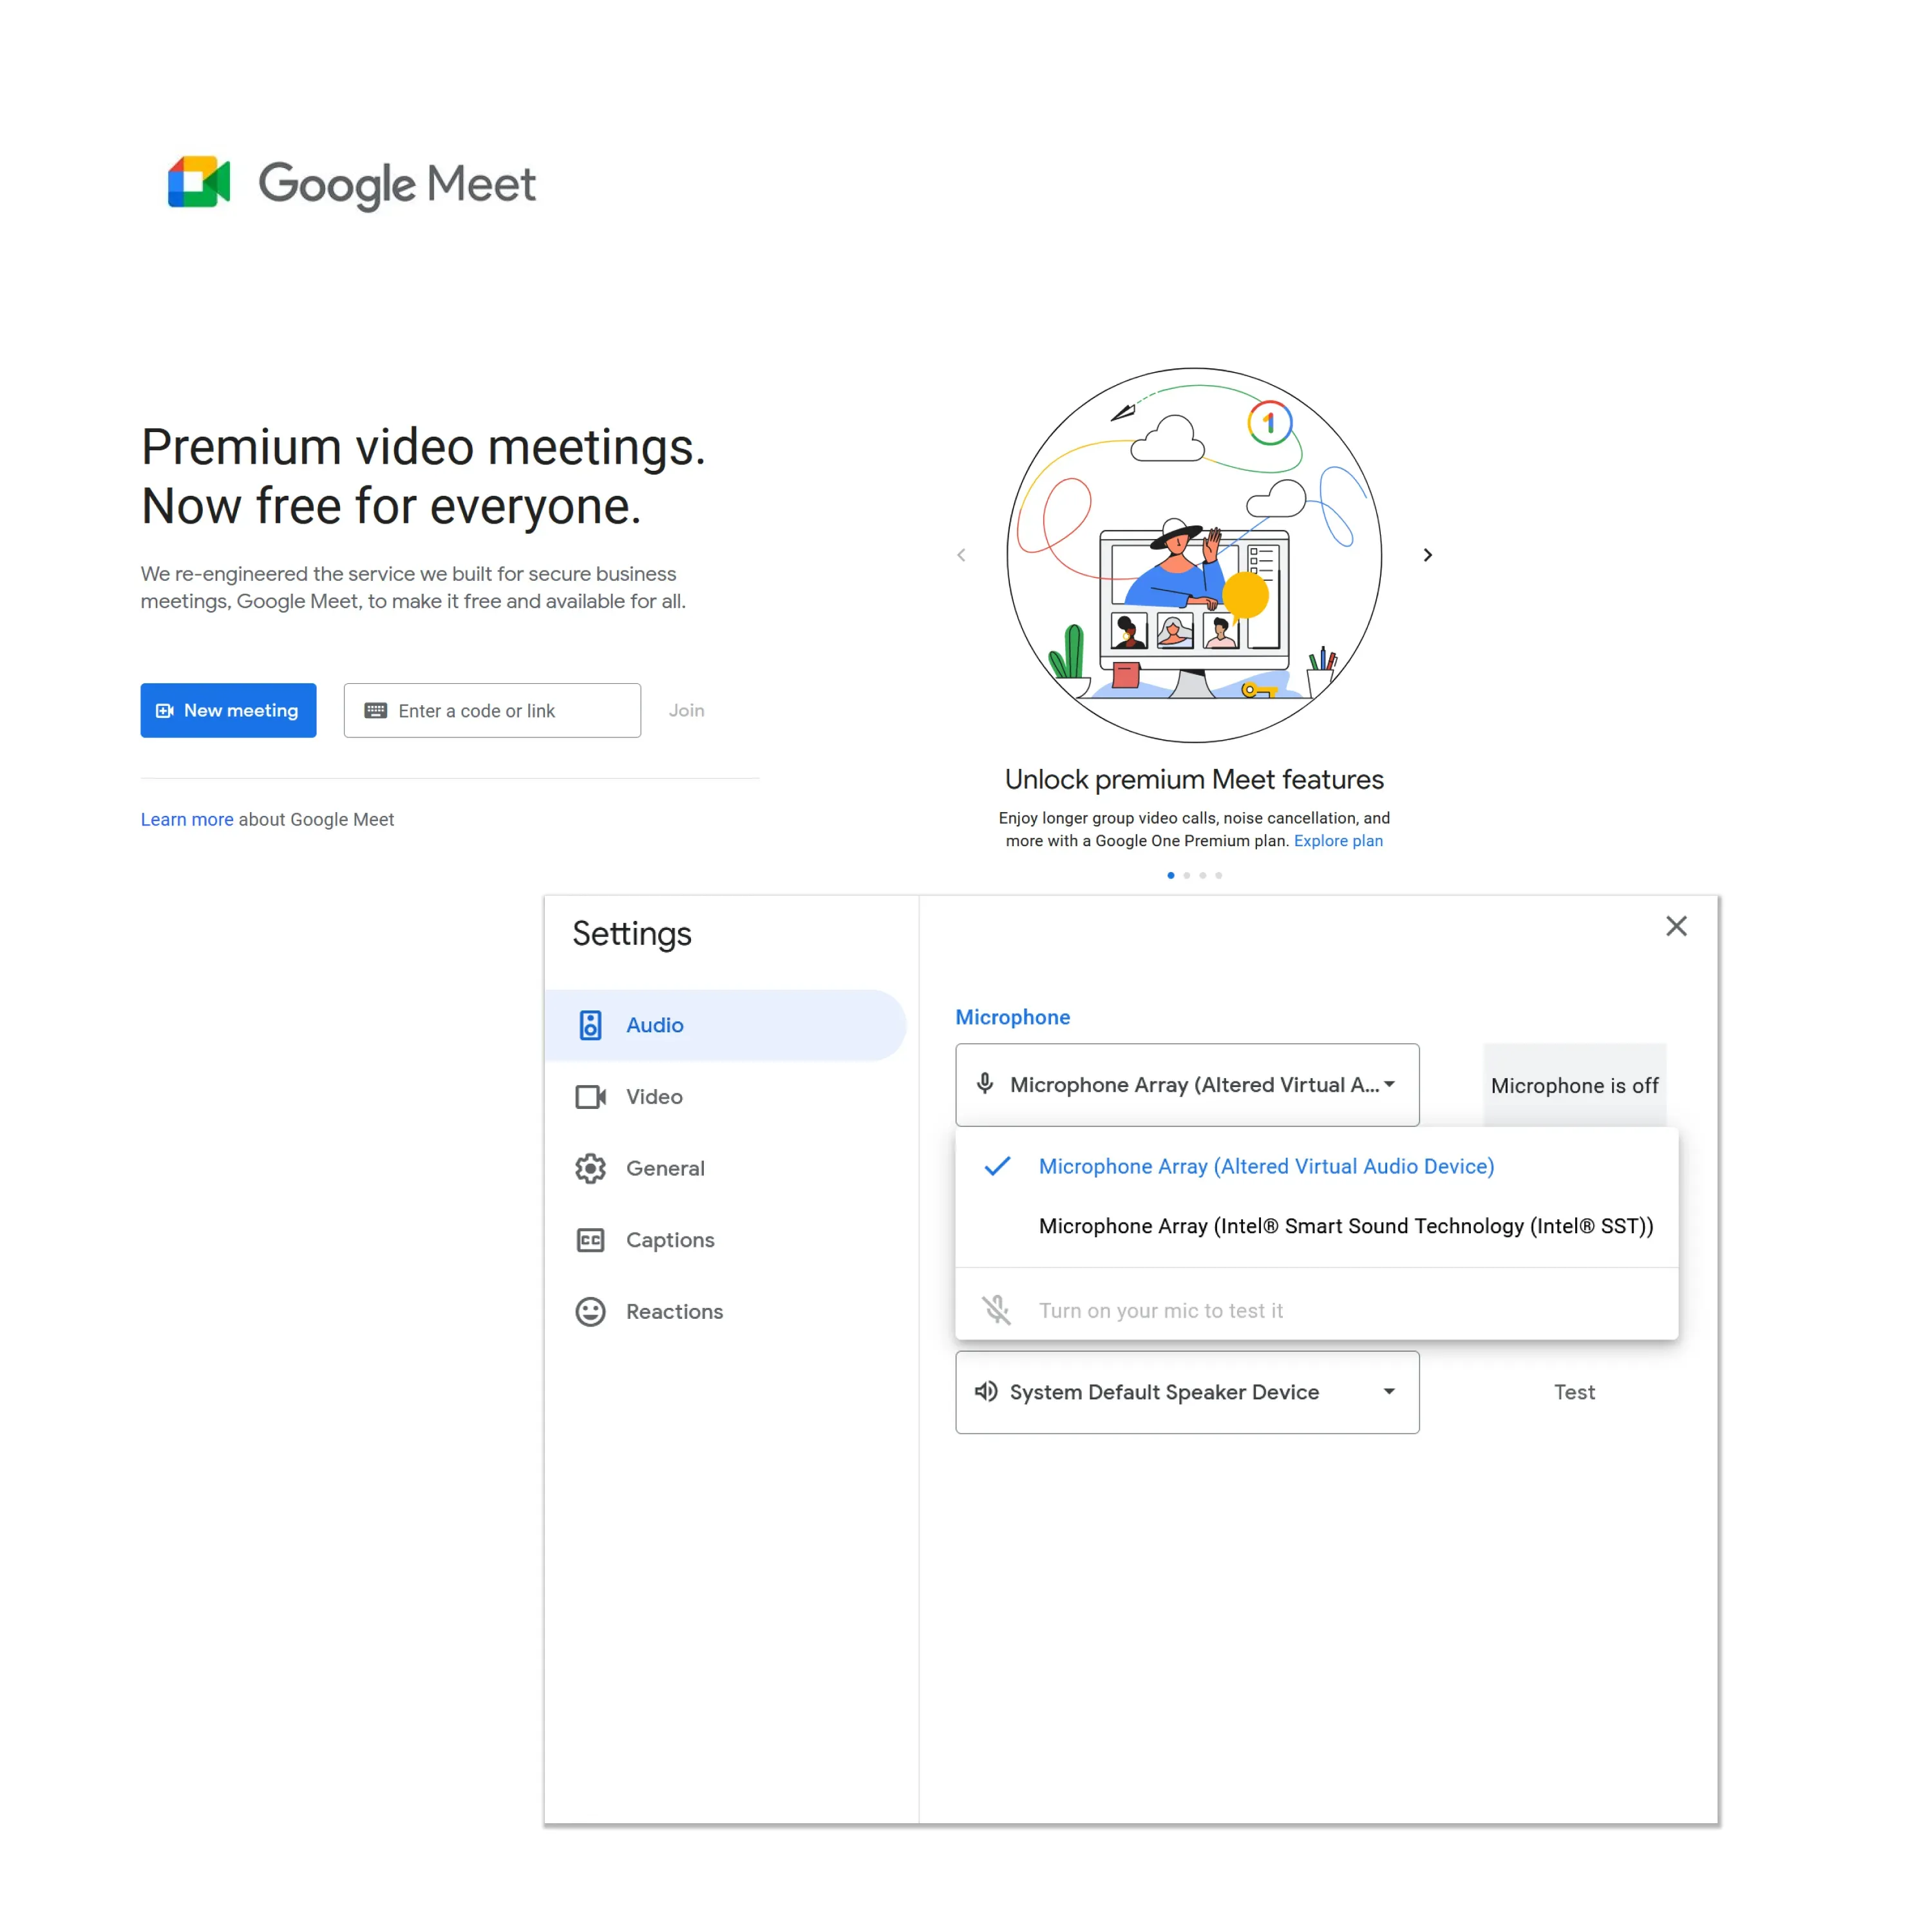 How to use Real-Time in Google Meet